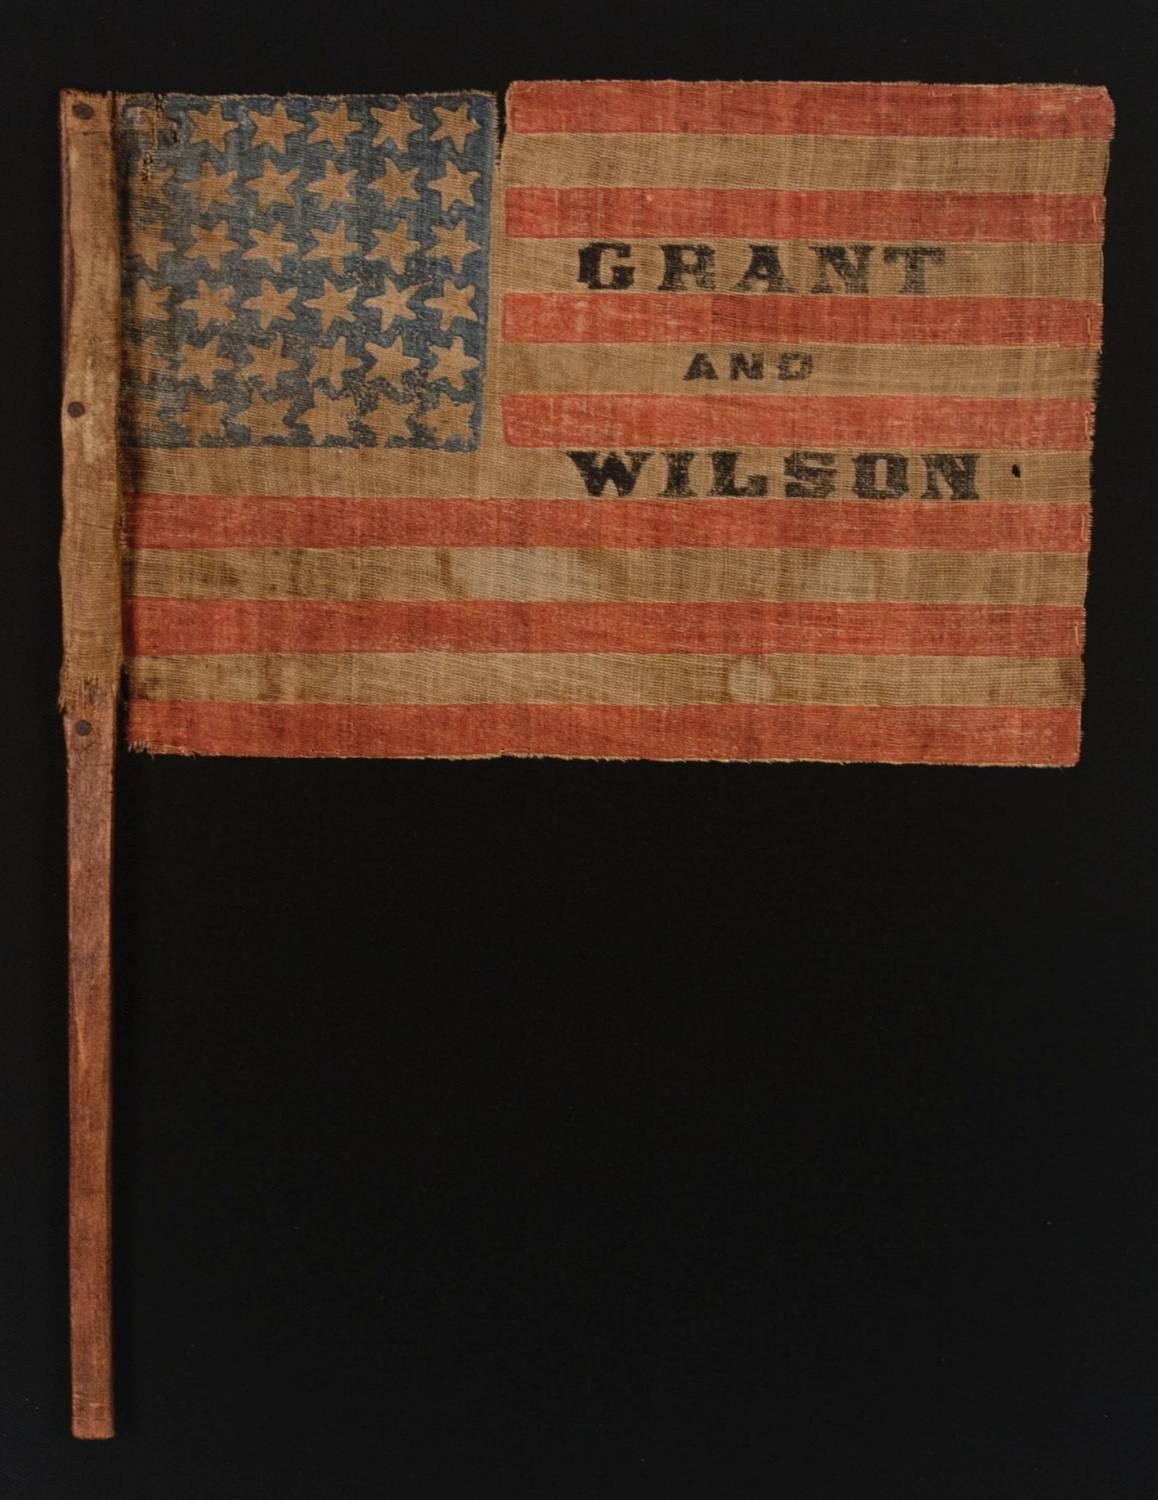 EXTREMELY RARE, 36 STAR, OVERPRINTED PARADE FLAG, MADE FOR THE 1872 PRESIDENTIAL CAMPAIGN OF ULYSSES S. GRANT & HENRY WILSON, ON ITS ORIGINAL, CARVED WOODEN STAFF:

36 star parade flag, printed on coarse, glazed cotton, made for the 1872